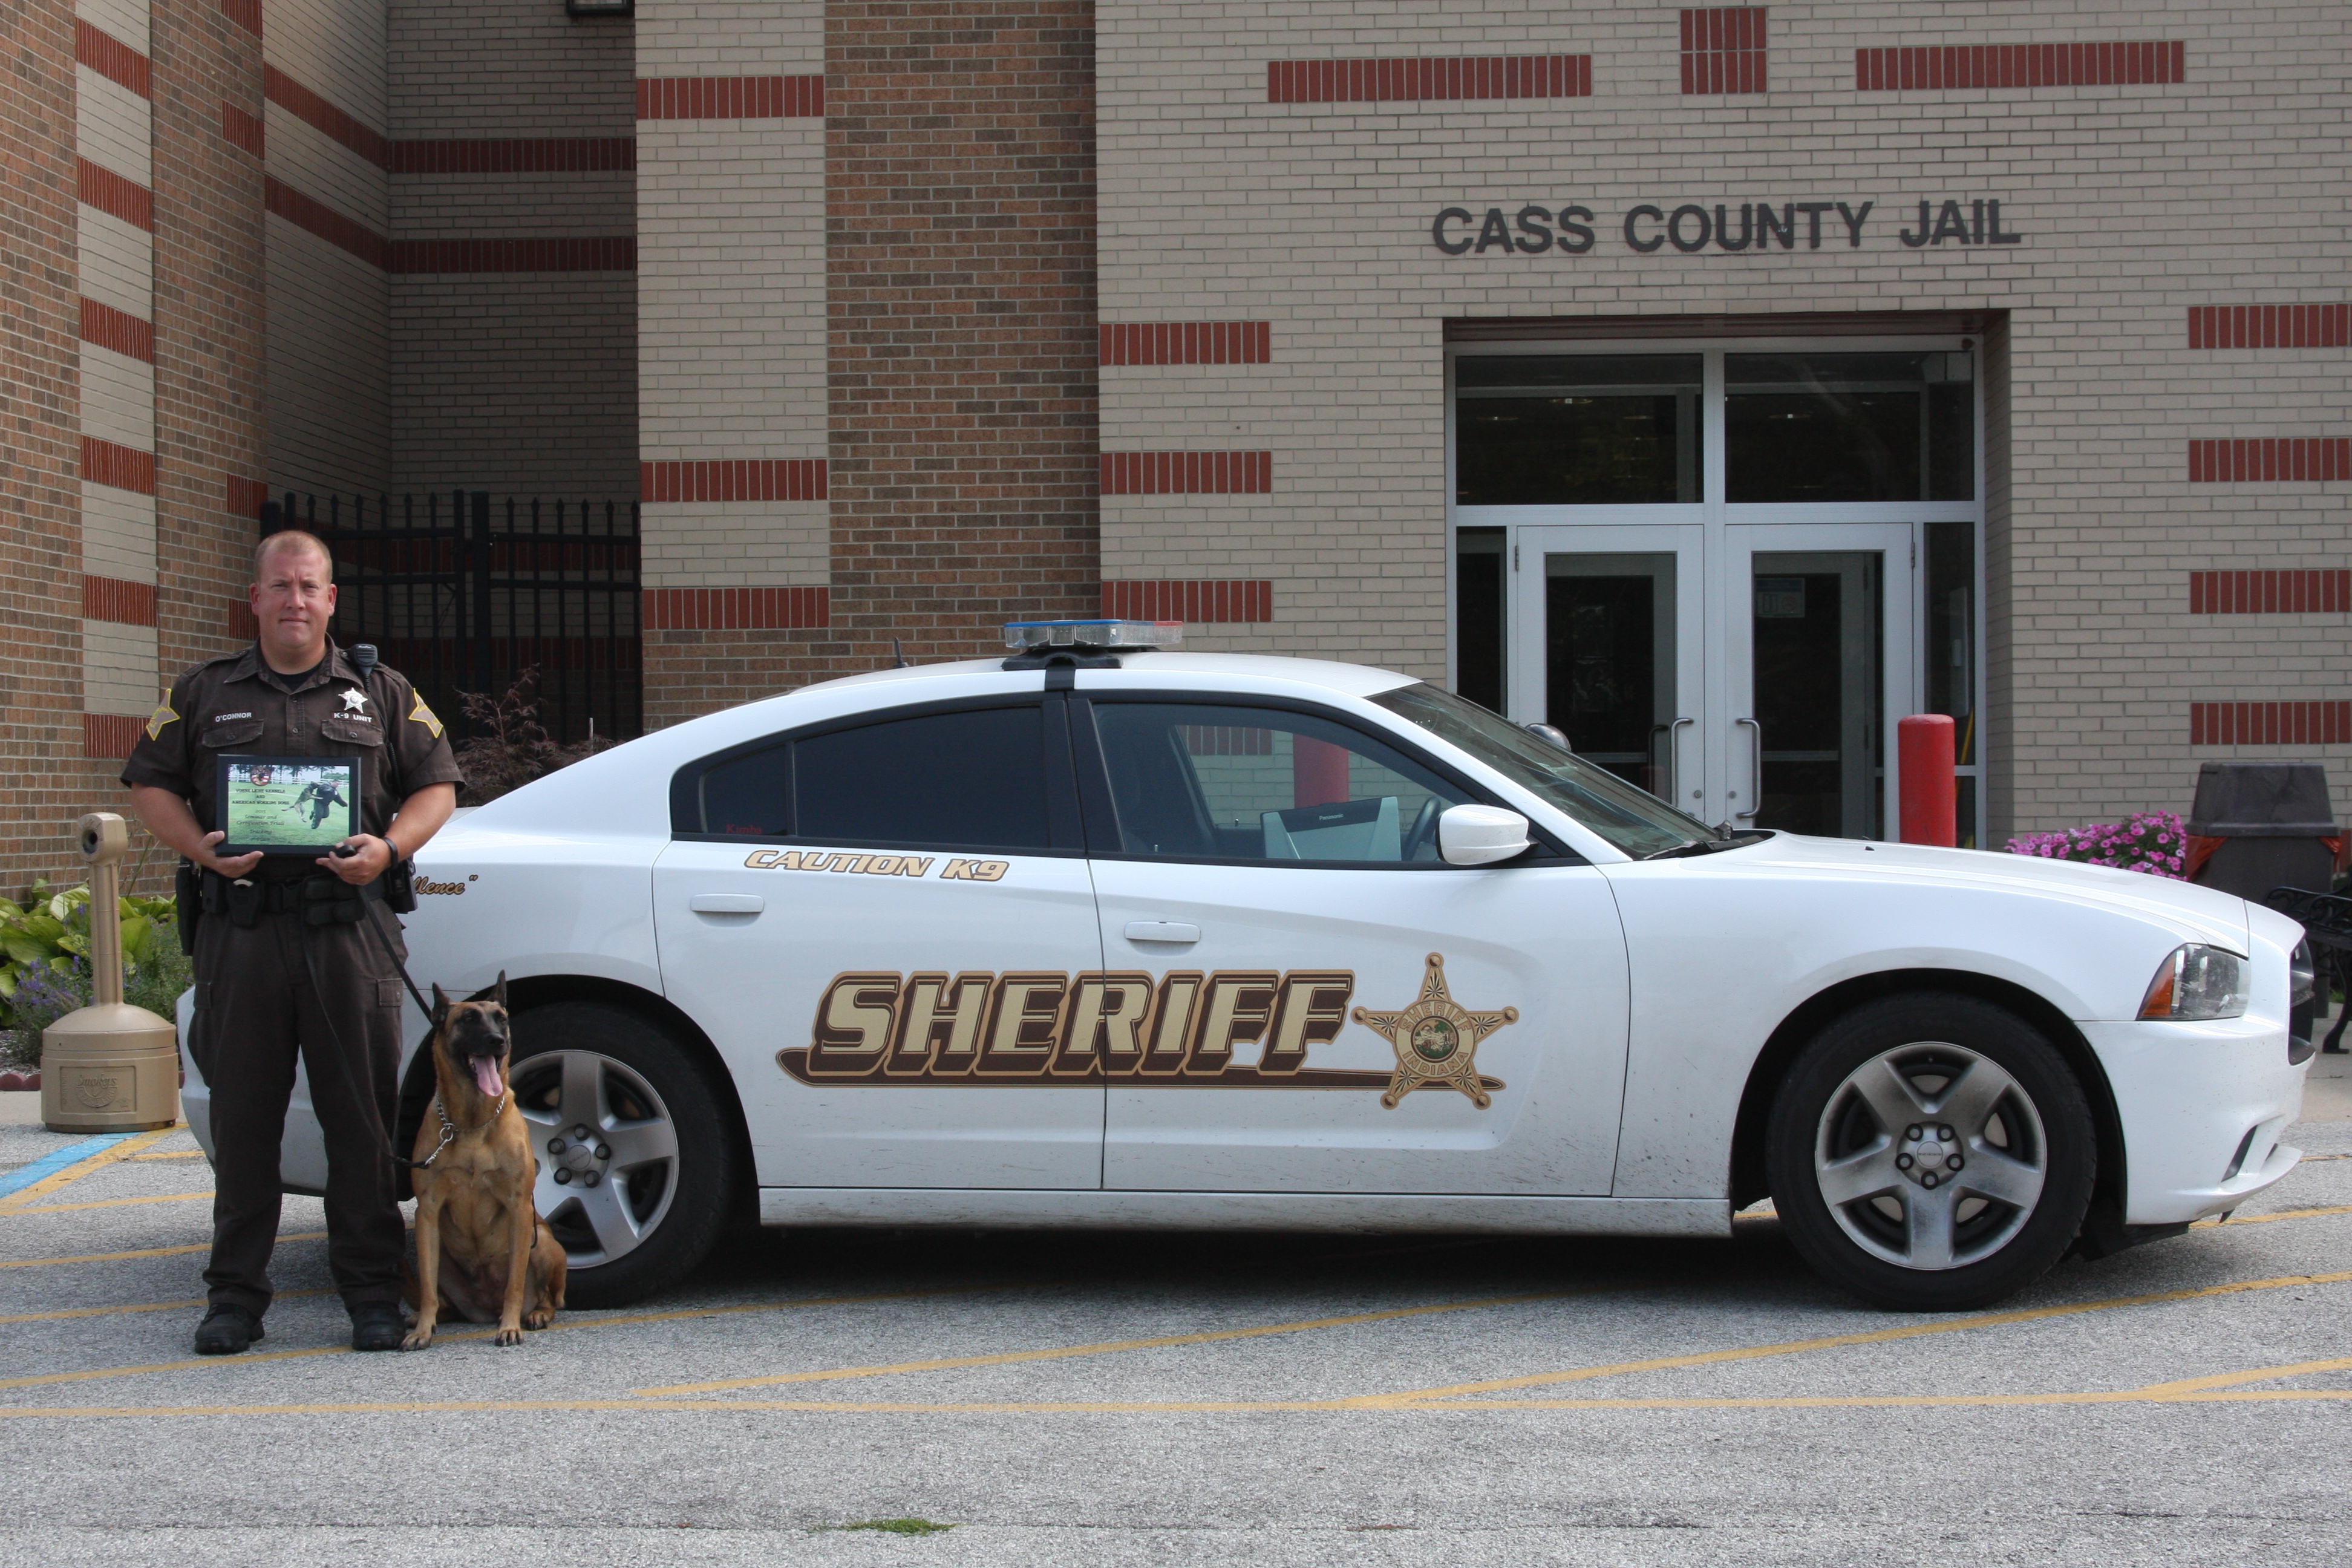 Thumbnail for the post titled: Cass County Sheriff’s Department K9 finishes first at K9 Olympics